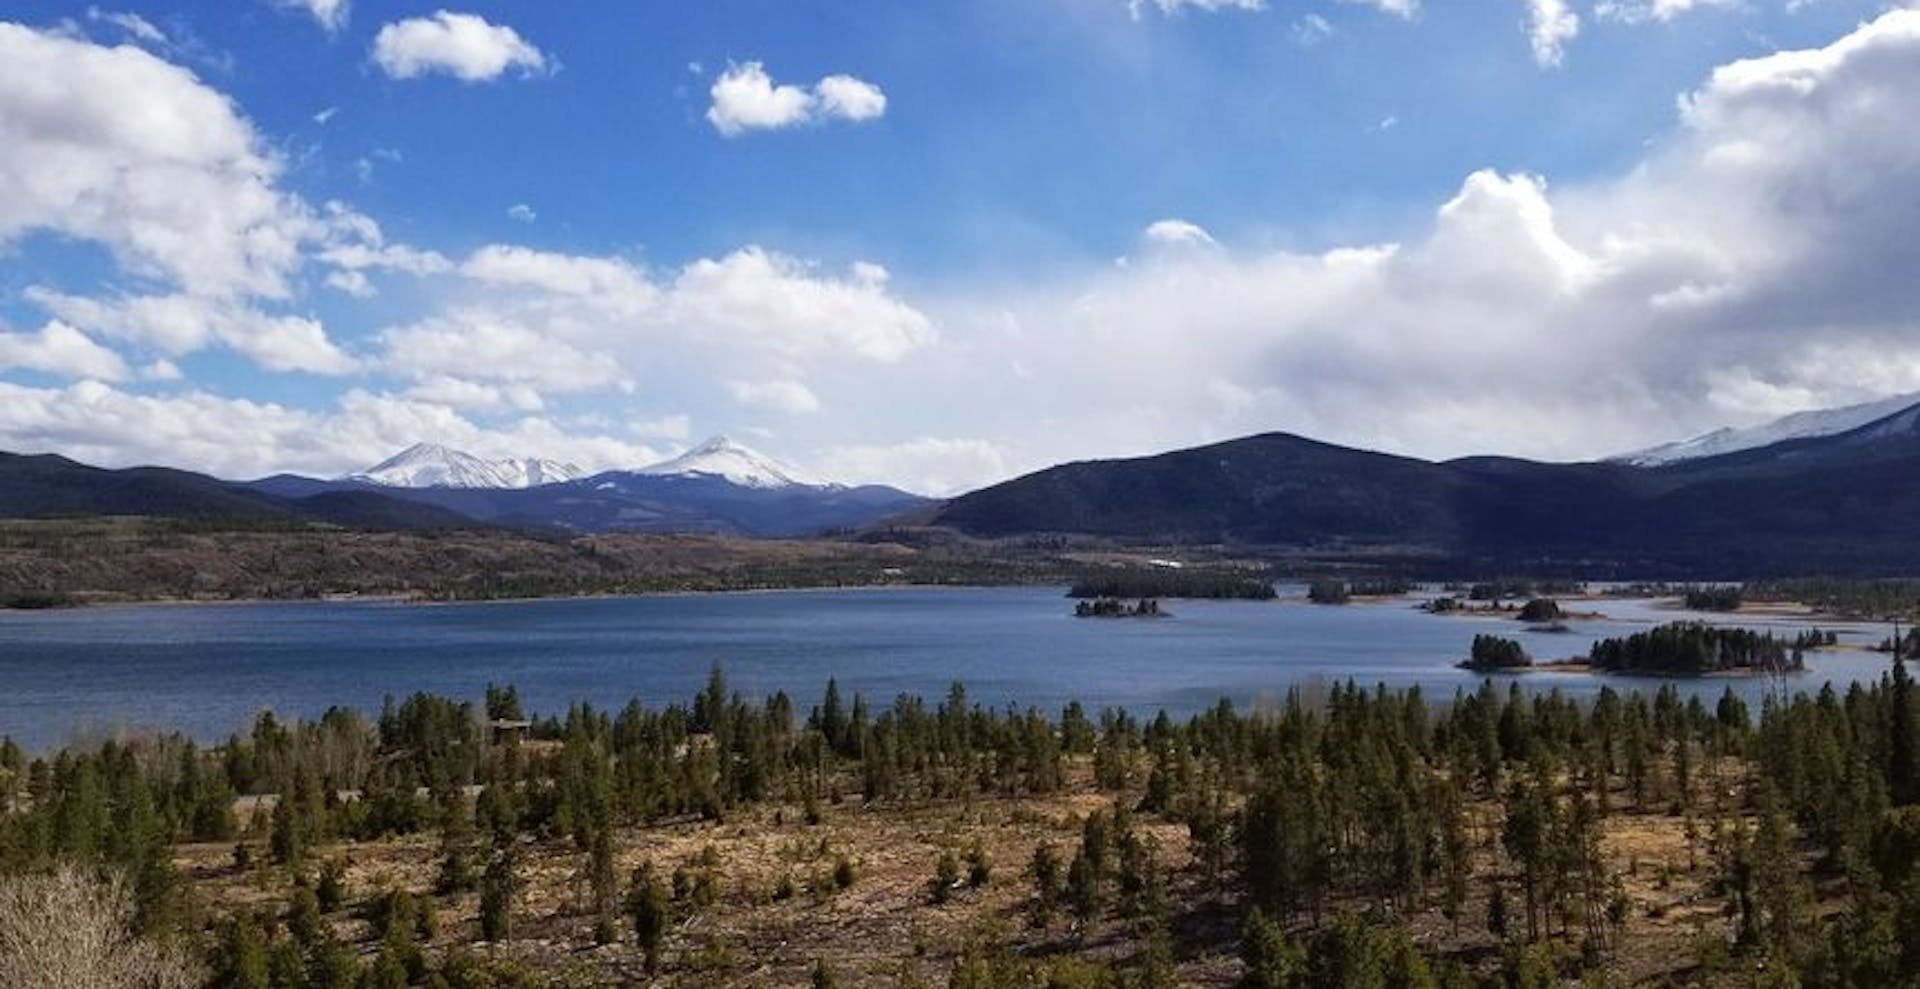 View of Dillon Reservoir from I-70